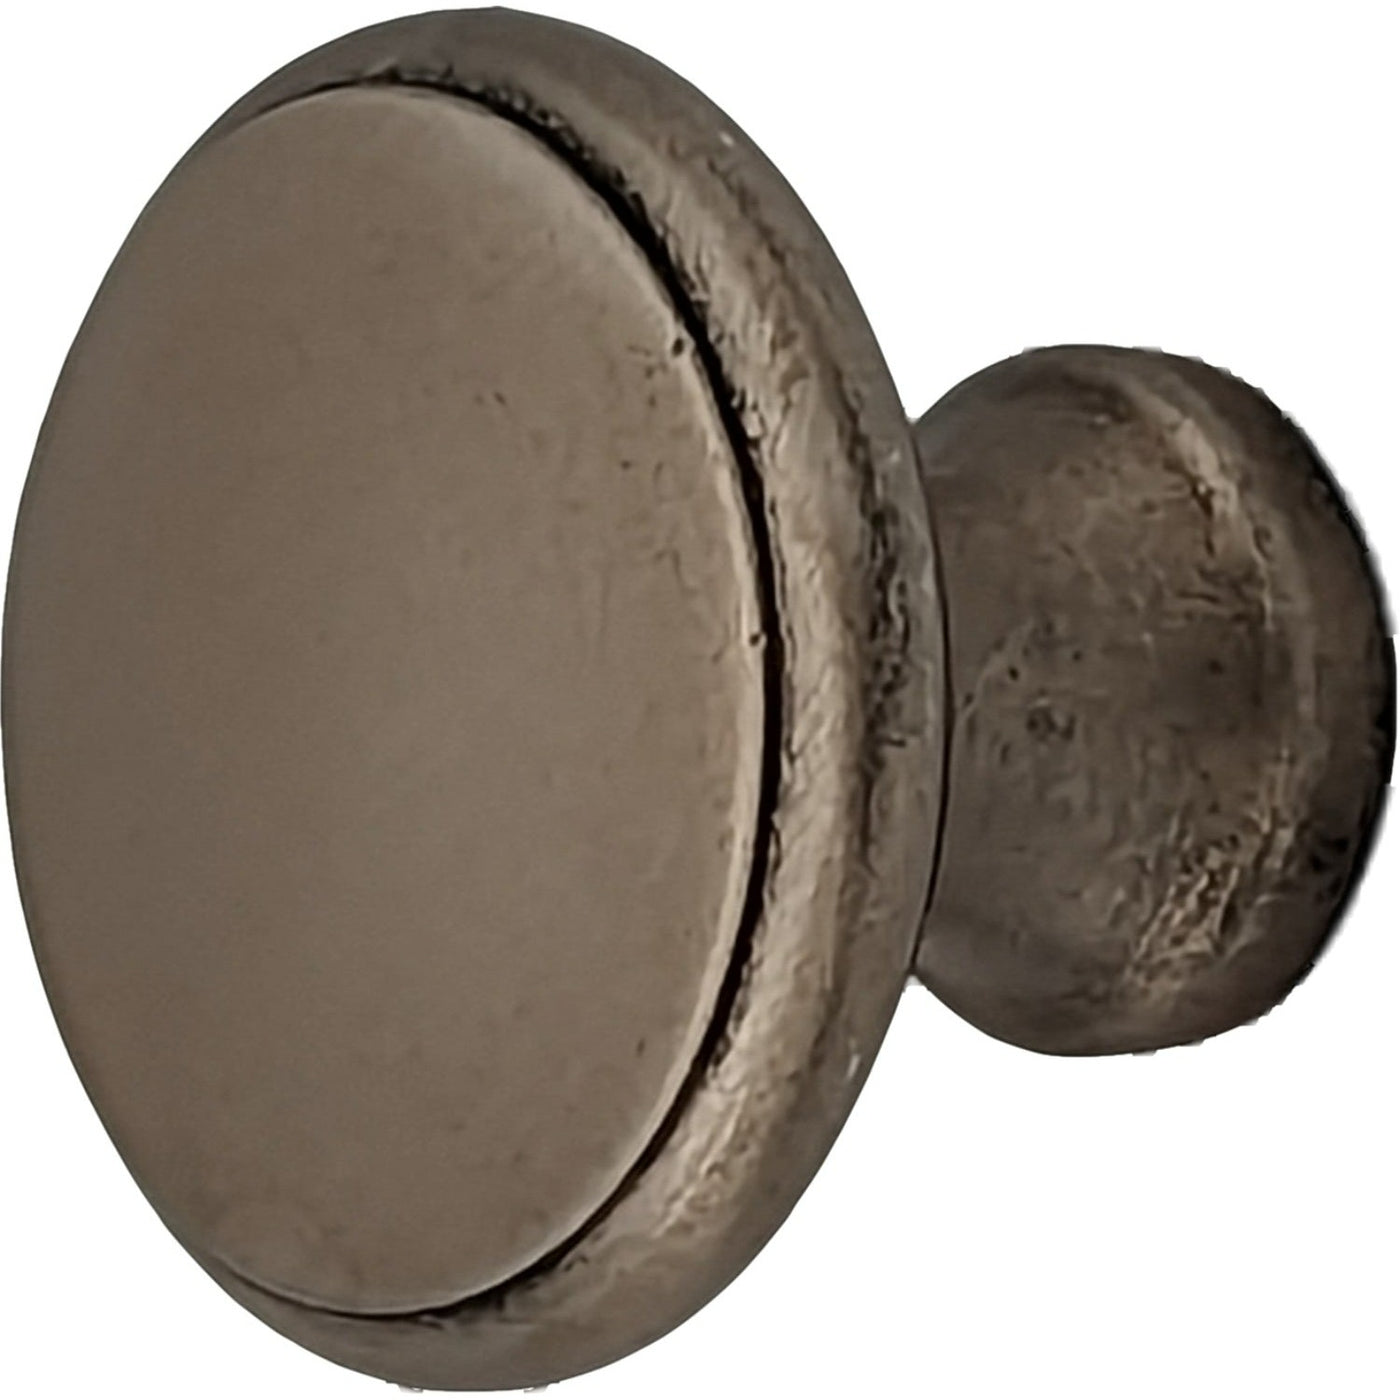 1 1/4 Inch Traditional Brass Flat Top Round Cabinet & Furniture Knob